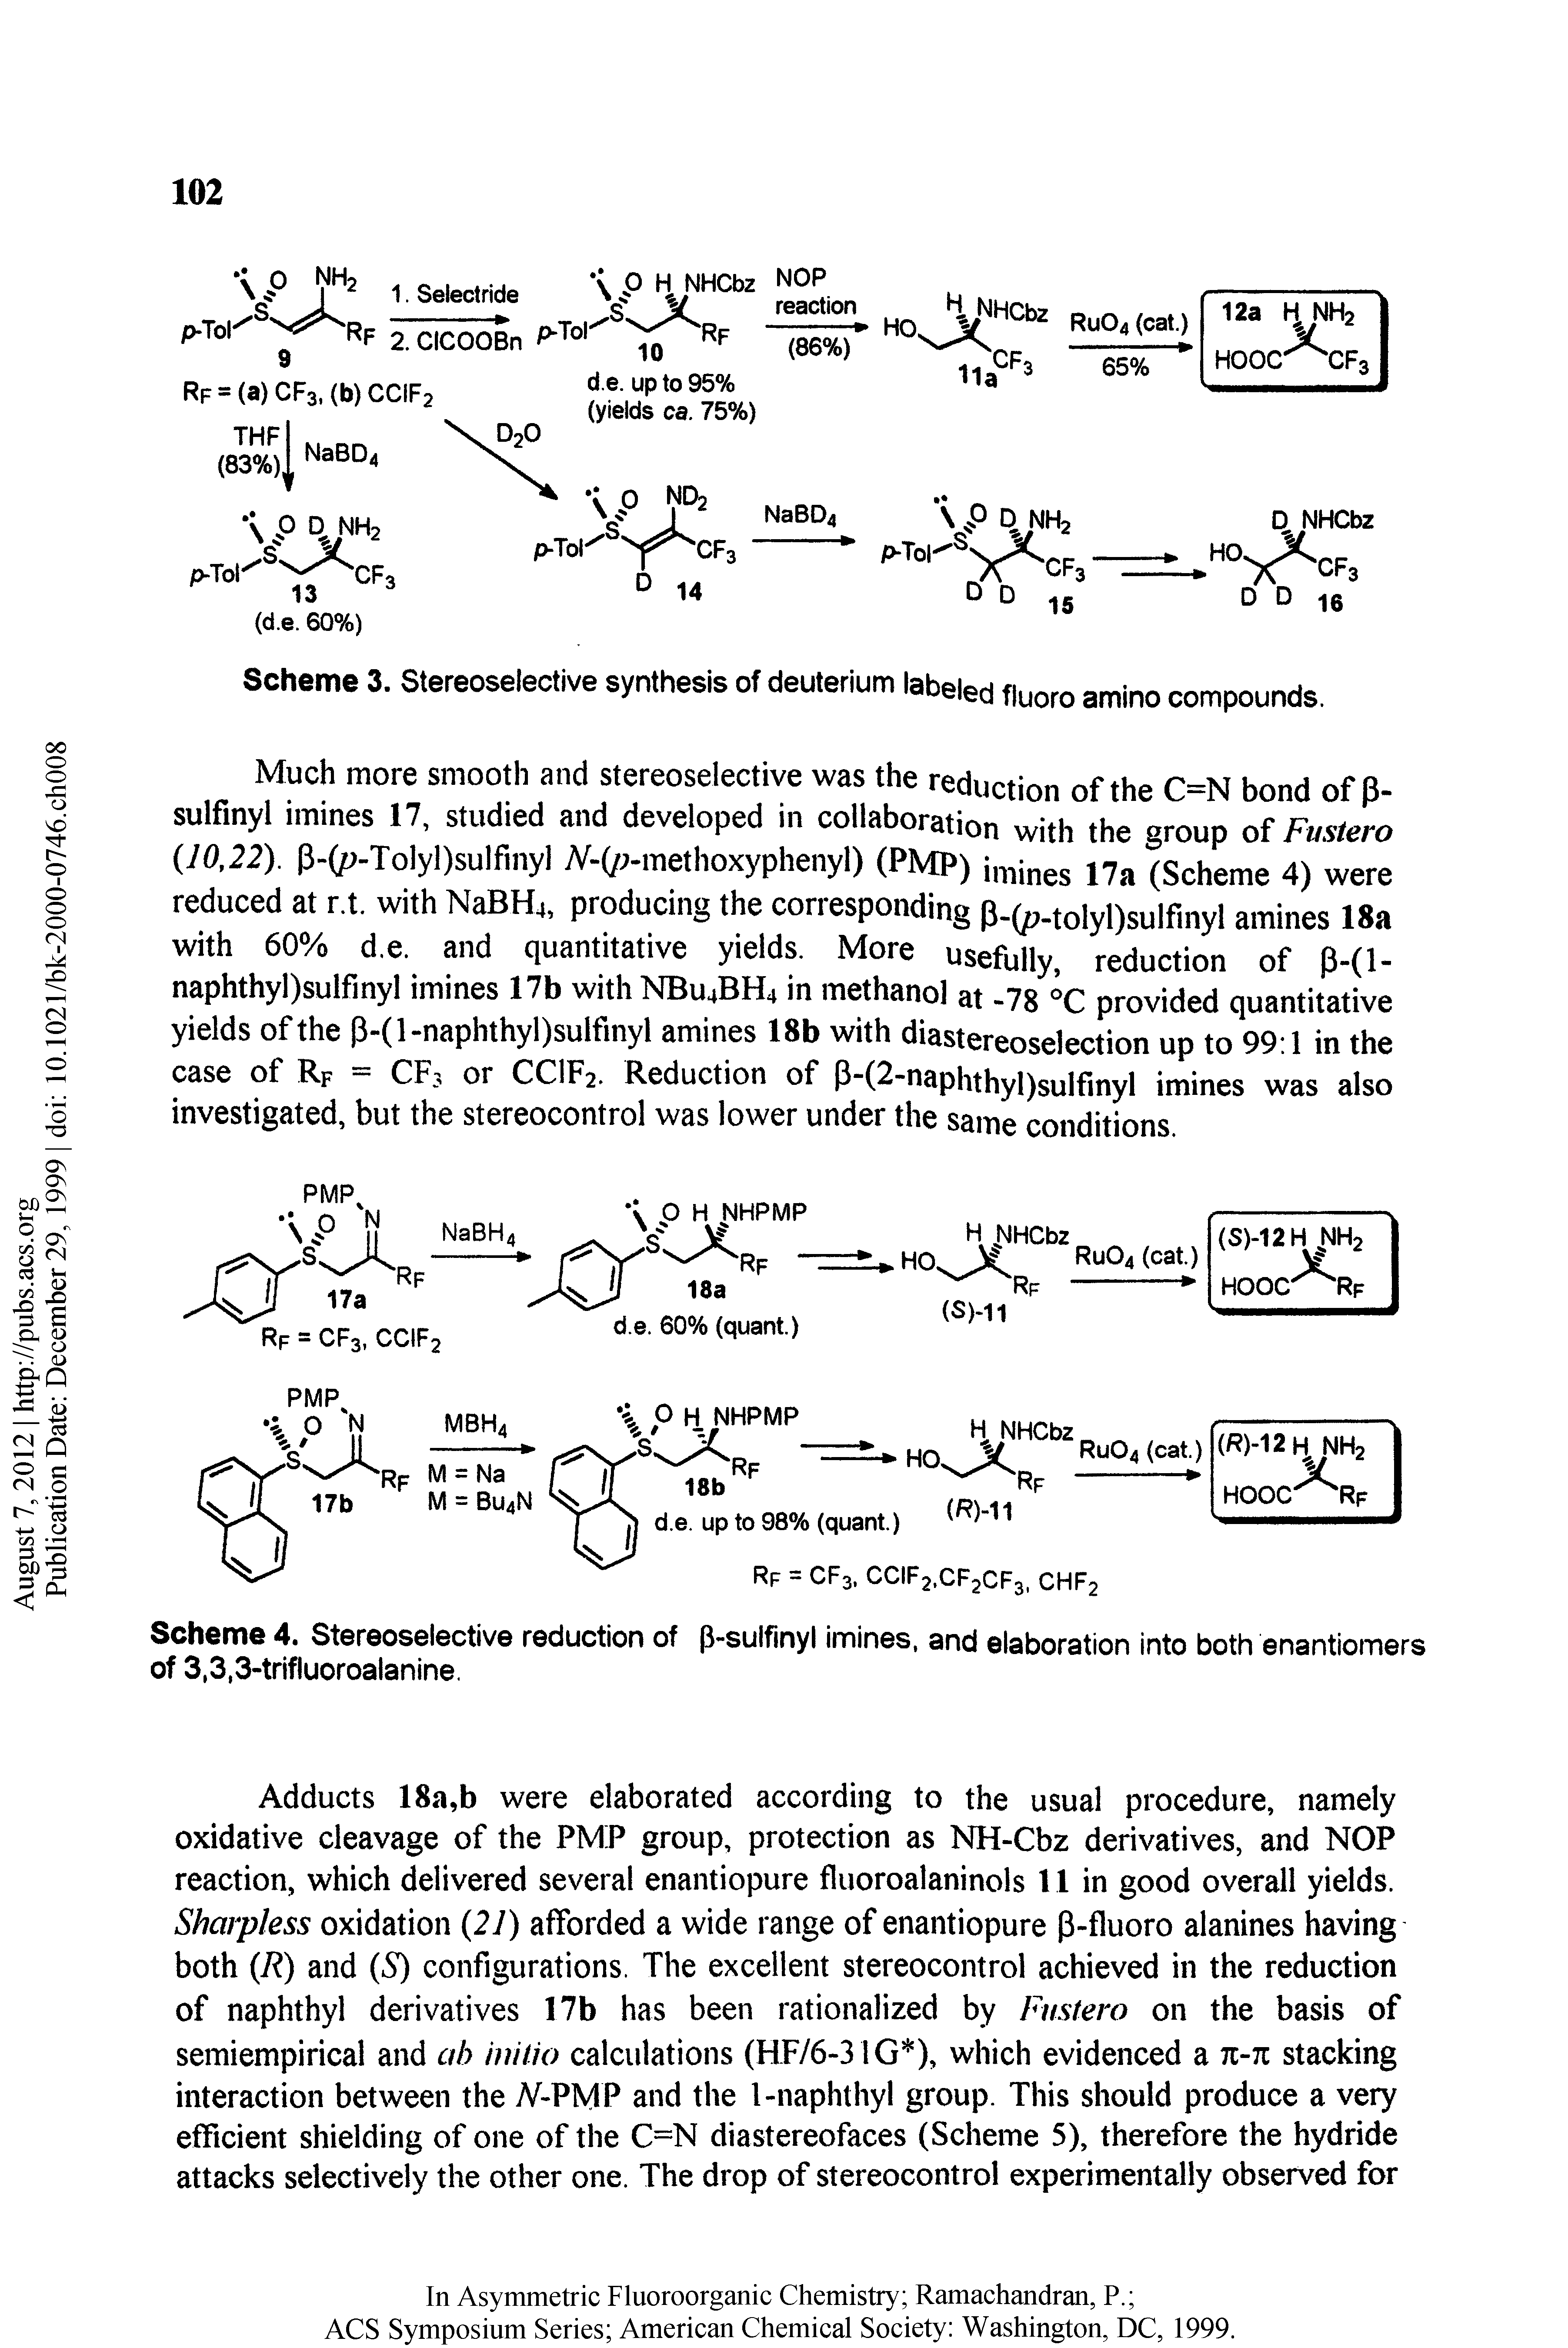 Scheme 4. Stereoselective reduction of p-sulfinyl imines, and elaboration into both enantiomers of 3,3,3-trifluoroalanine.